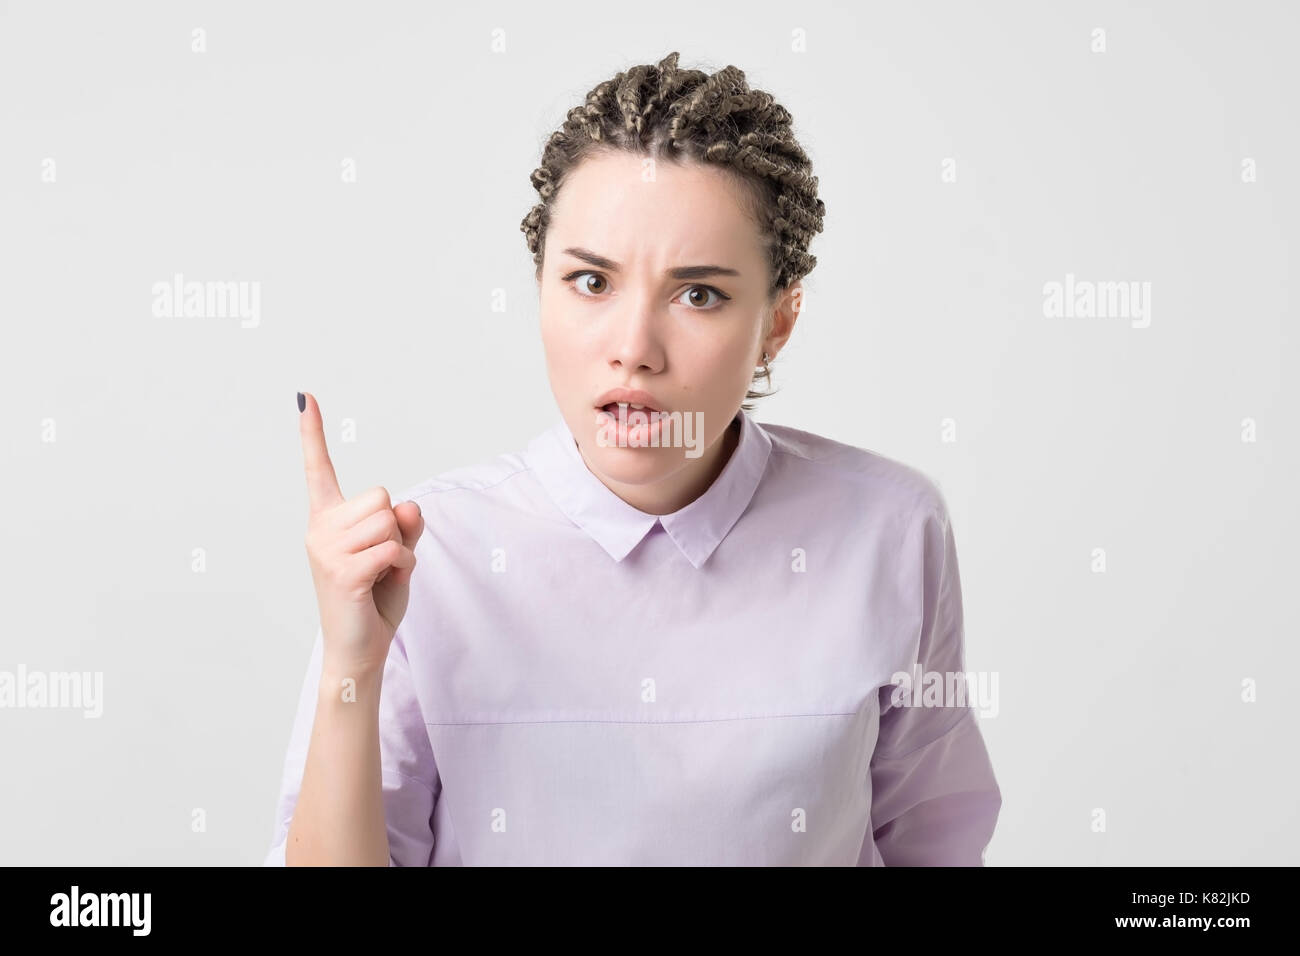 Portrait of serious, frowning, angry, grumpy young woman with african braids pointing finger upwards, scolding someone Stock Photo